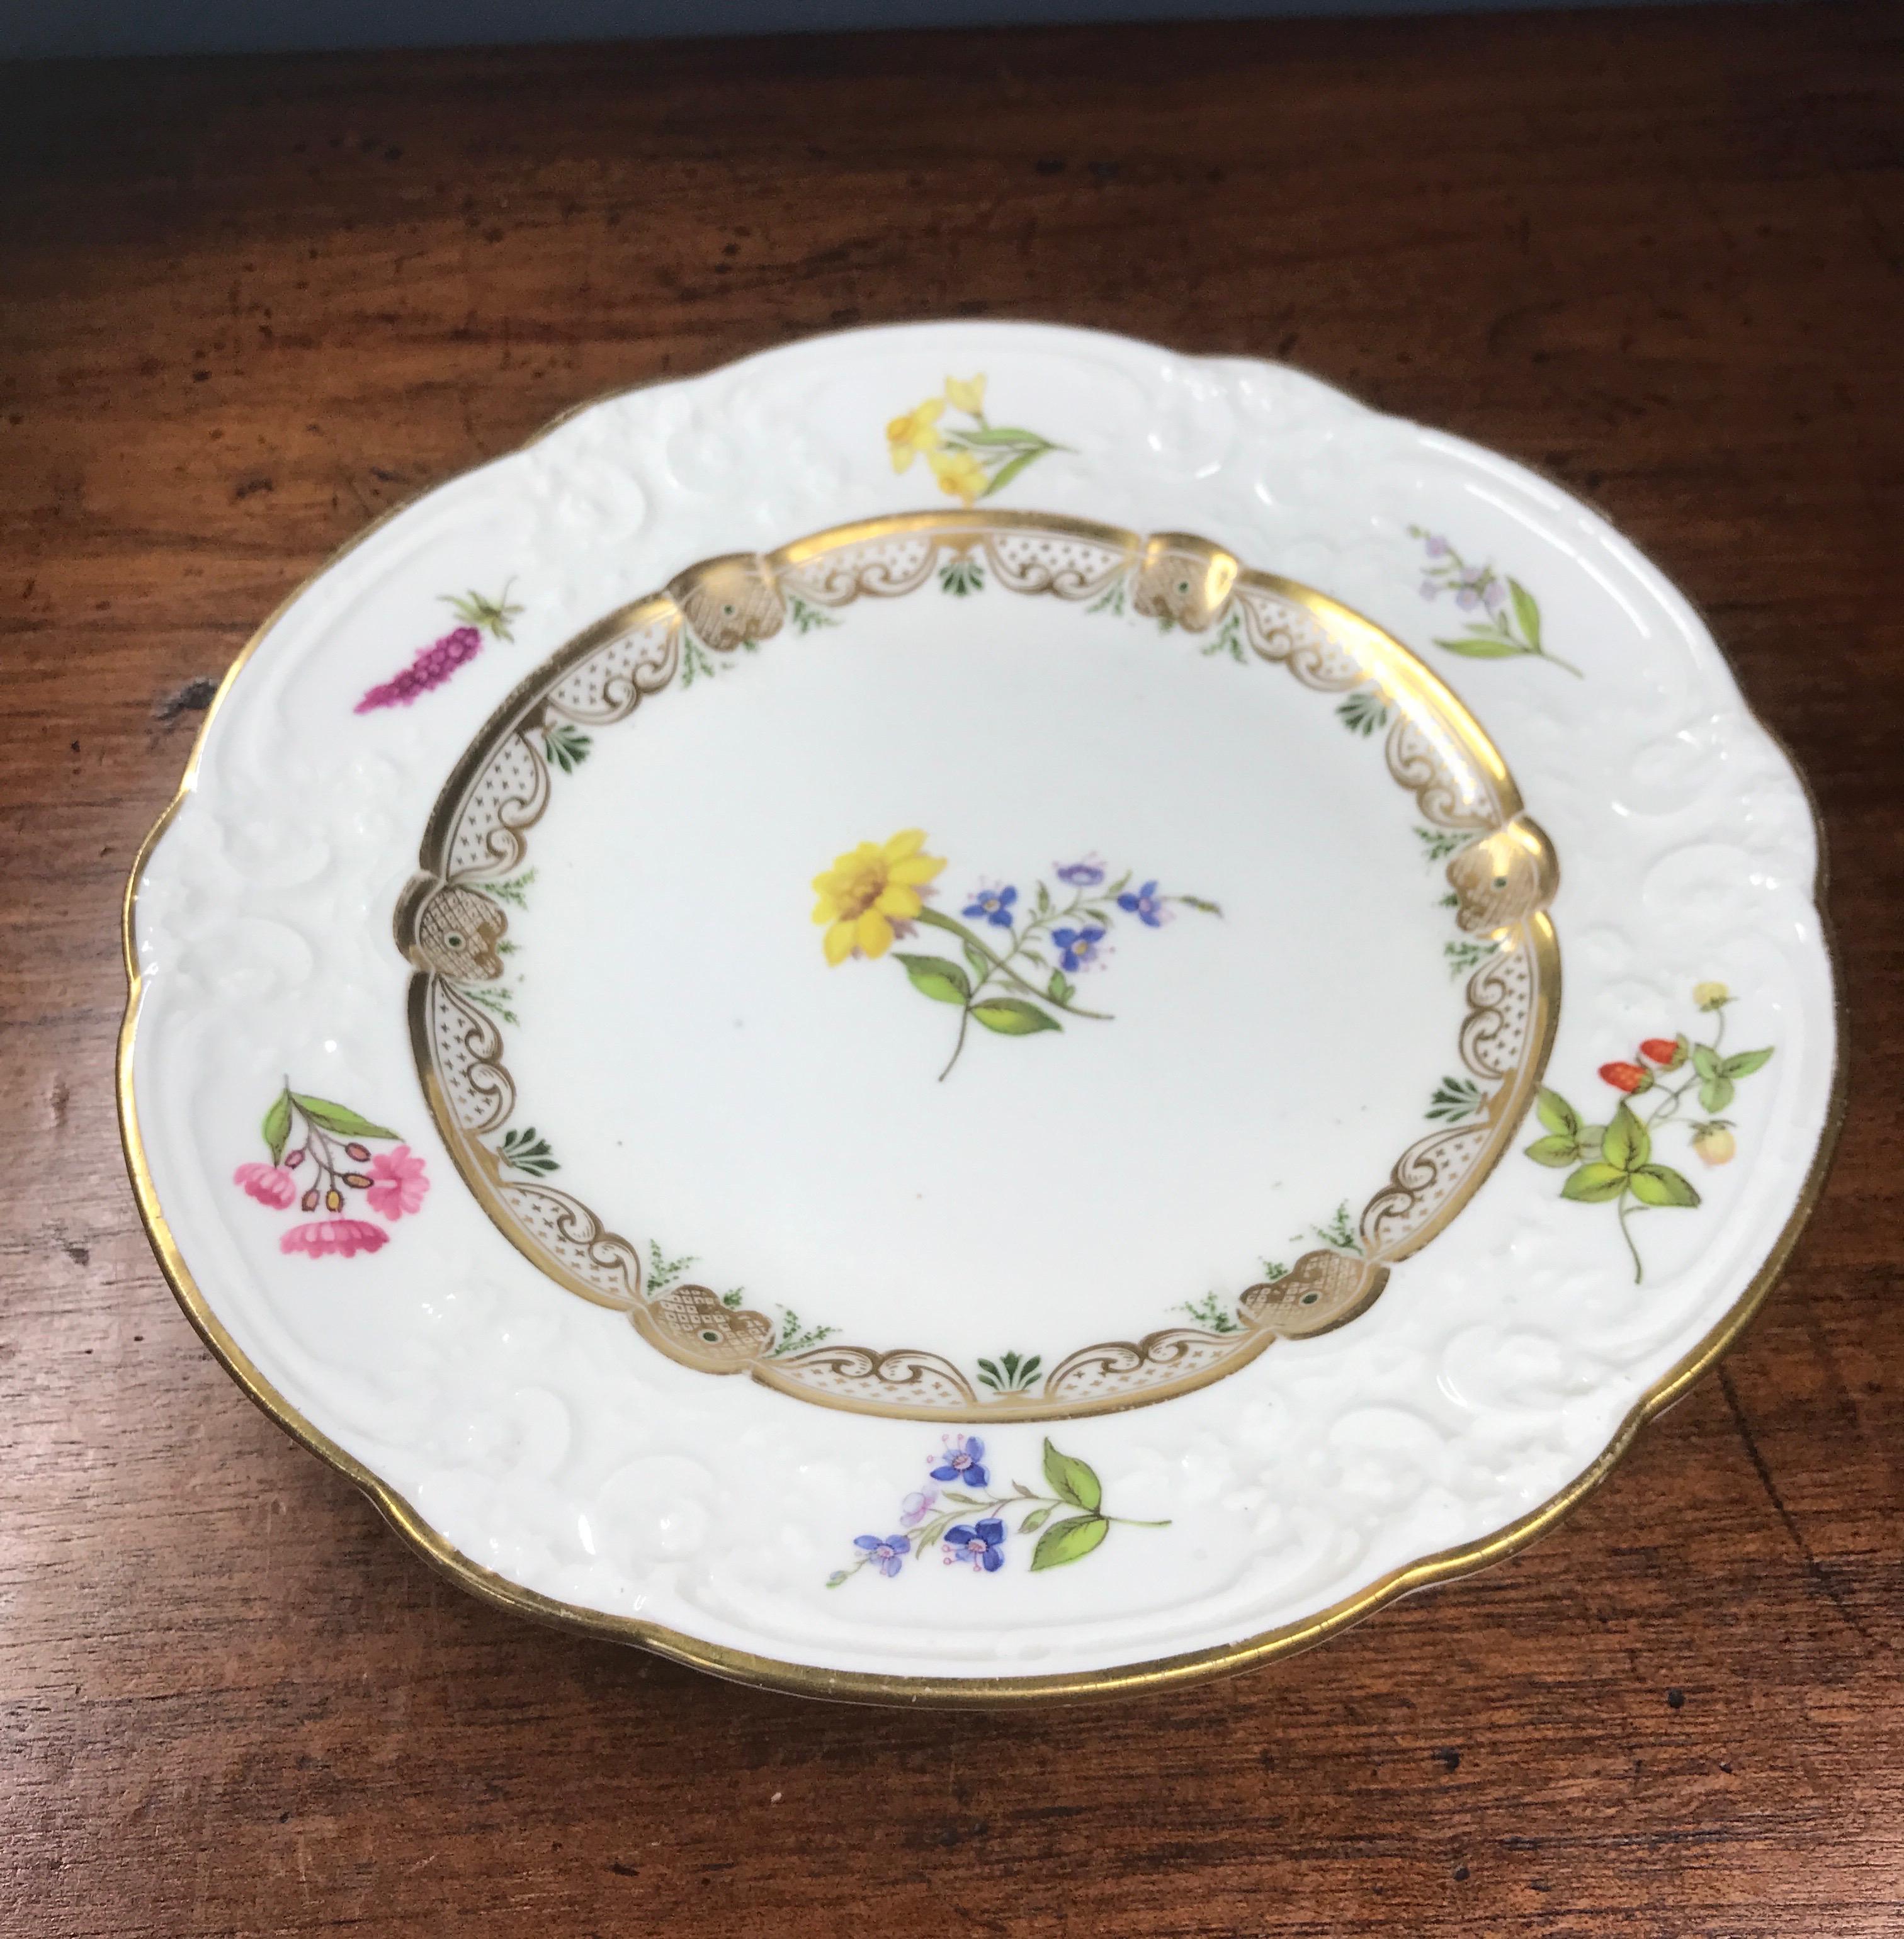 Swansea Porcelain Plate with Flower Specimens, C. 1820 For Sale 4